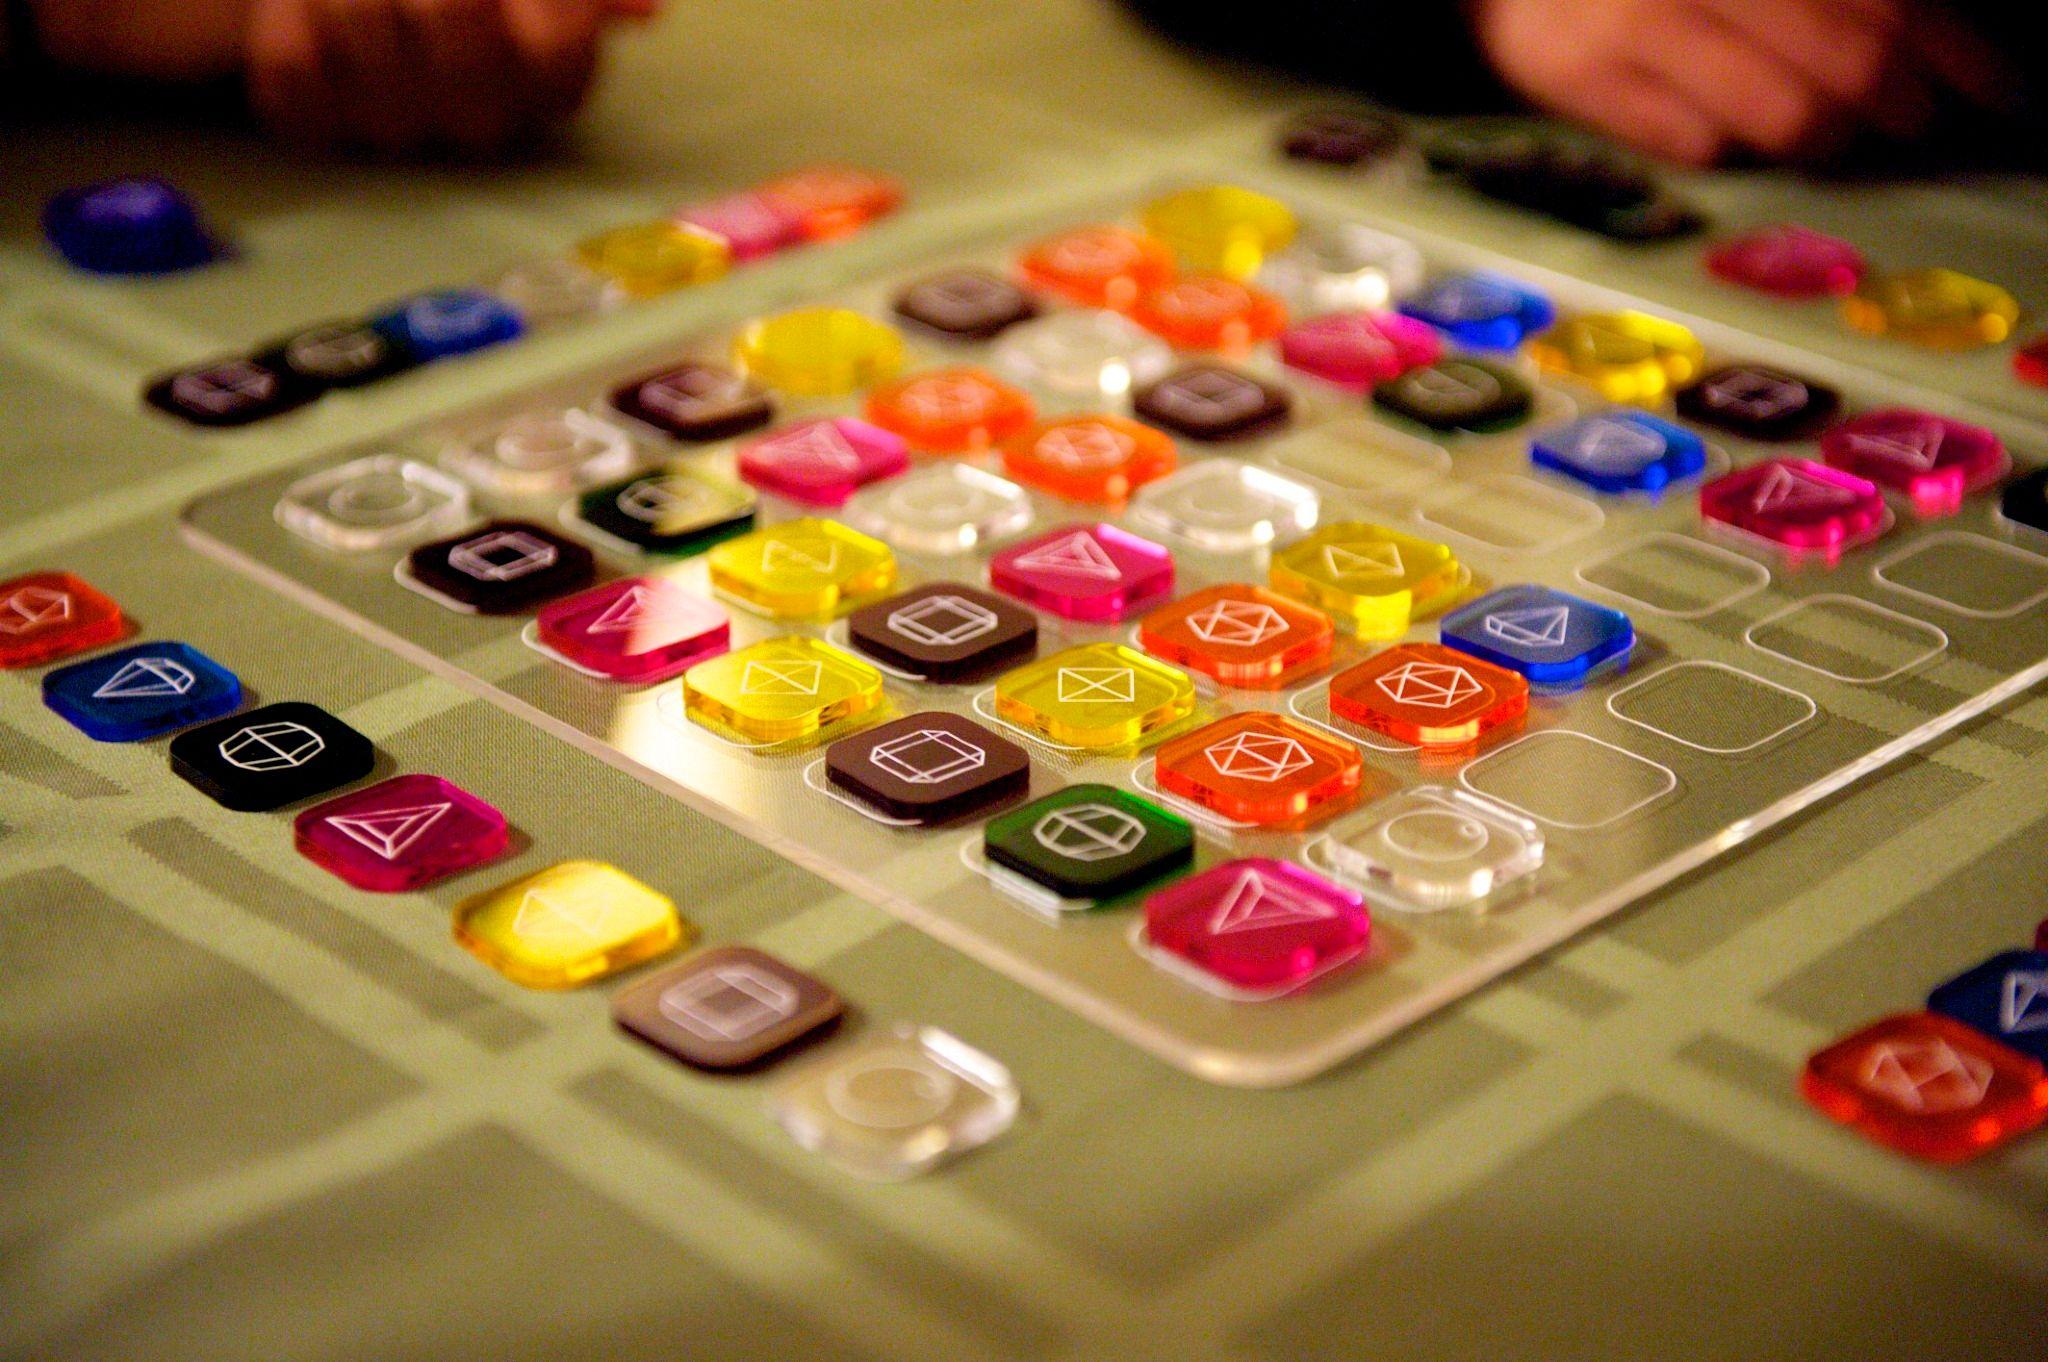 There are various square tokens on a clear white tile. Each of the tokens has a color and a shape unique to that color on it. There are green, brown, black, yellow, orange, clear, and dark pink tokens.